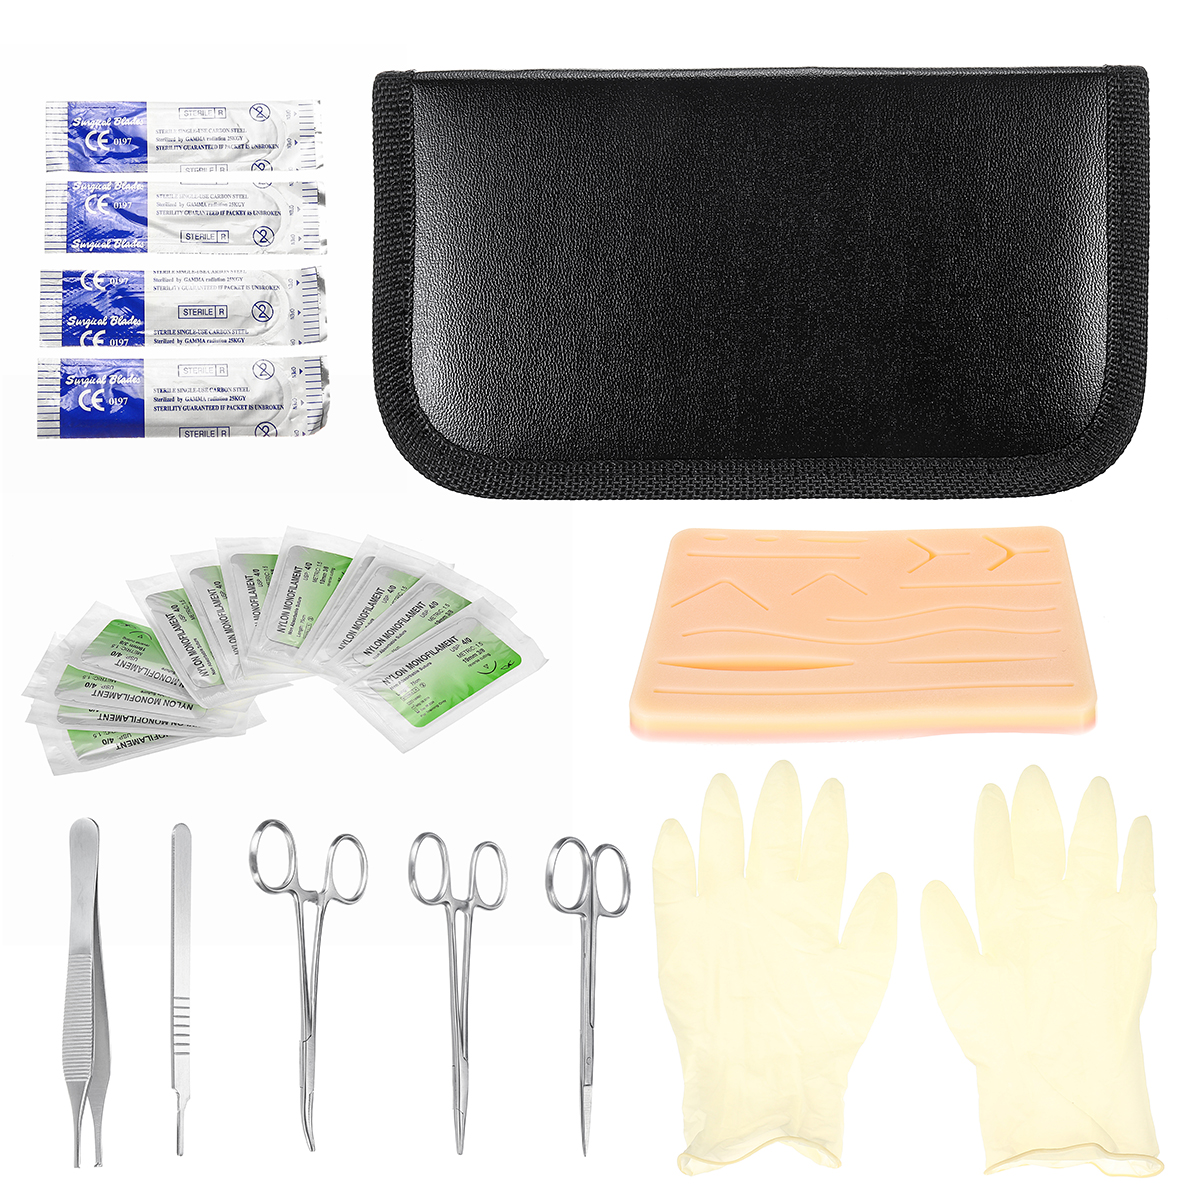 

25Pcs Medical Suture Training Kits Set with Silicone Skin Suturing Practice Training Mould Pad for Medical Student